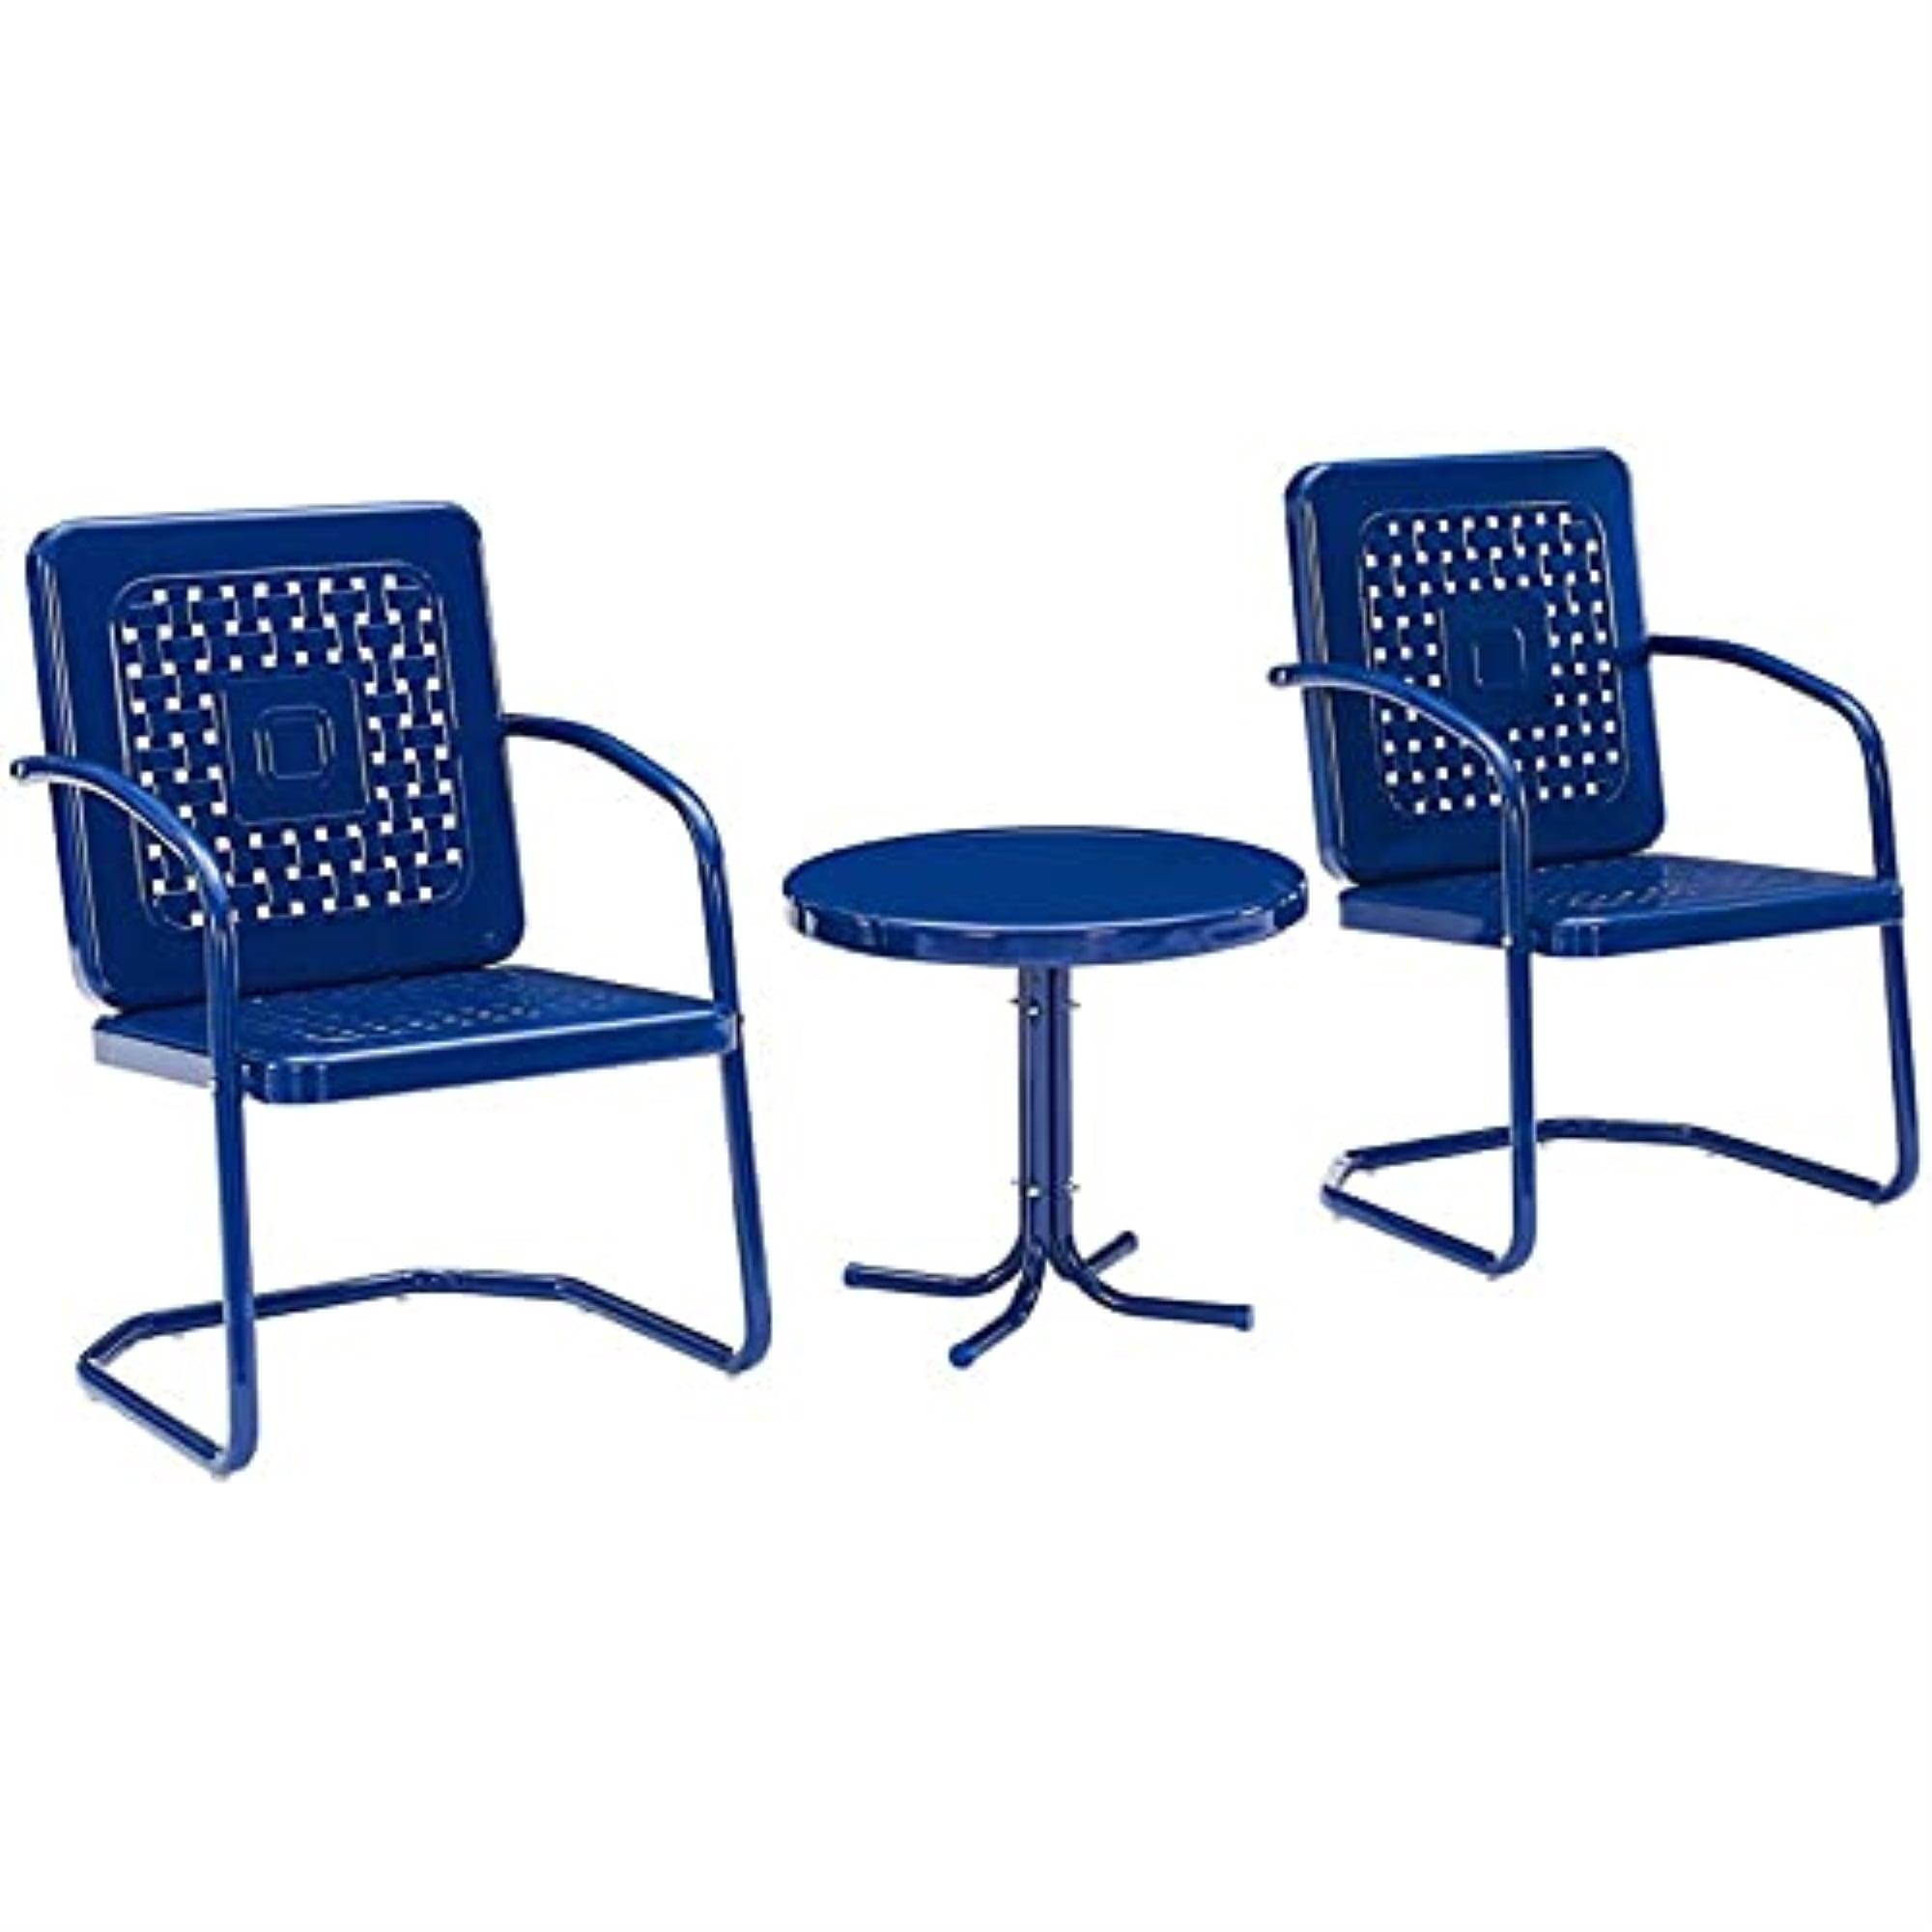 Navy Gloss Metal Outdoor Chair Set with Side Table